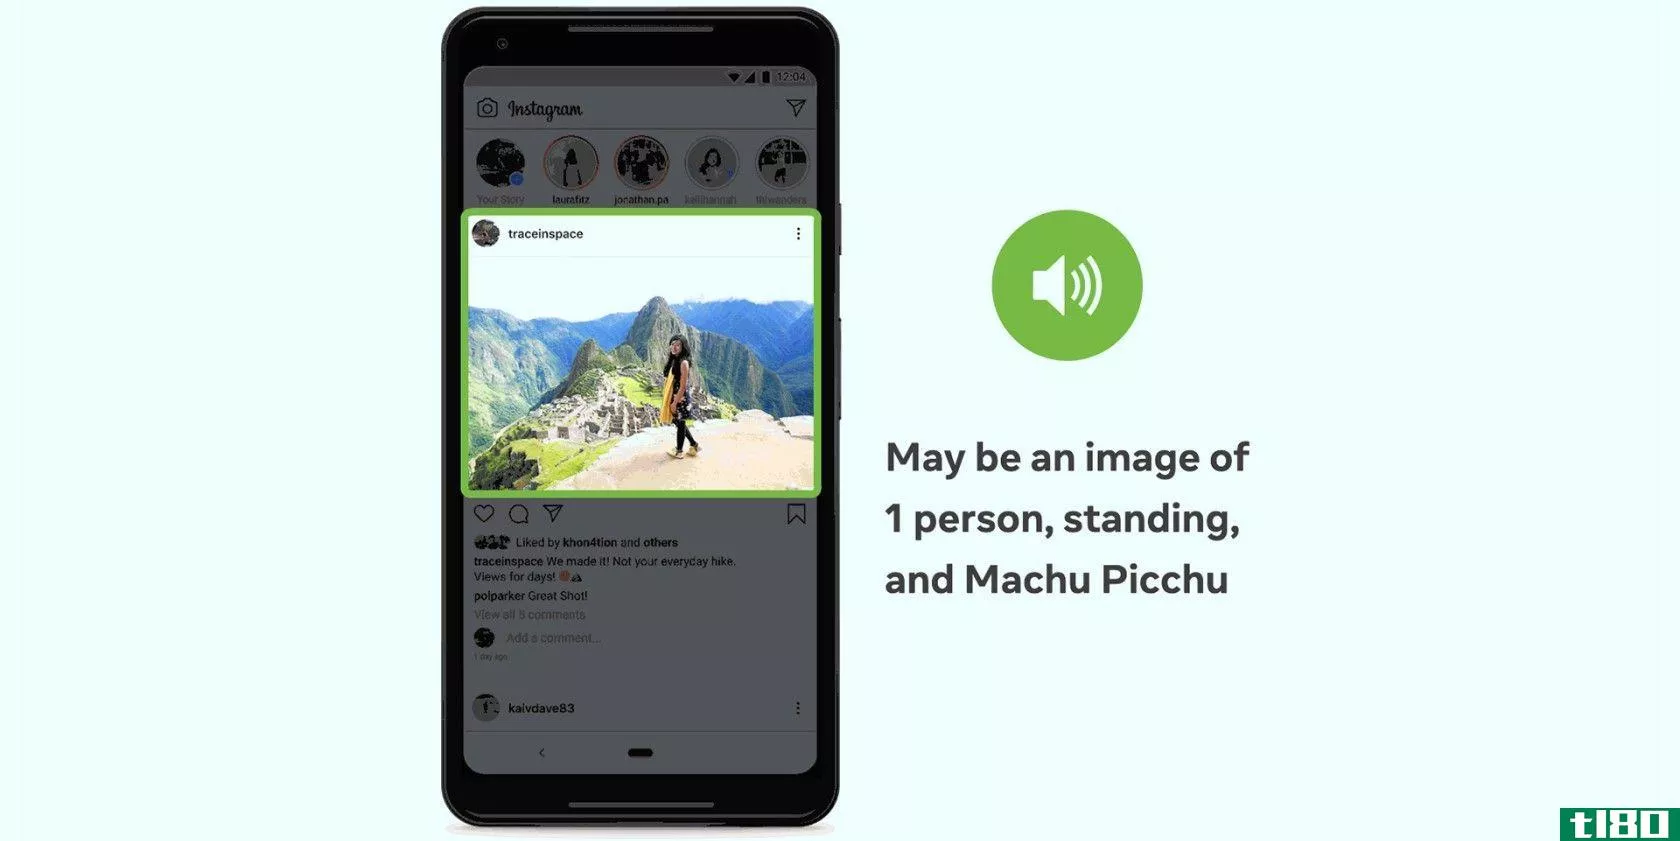 Facebook AI visually-impaired users